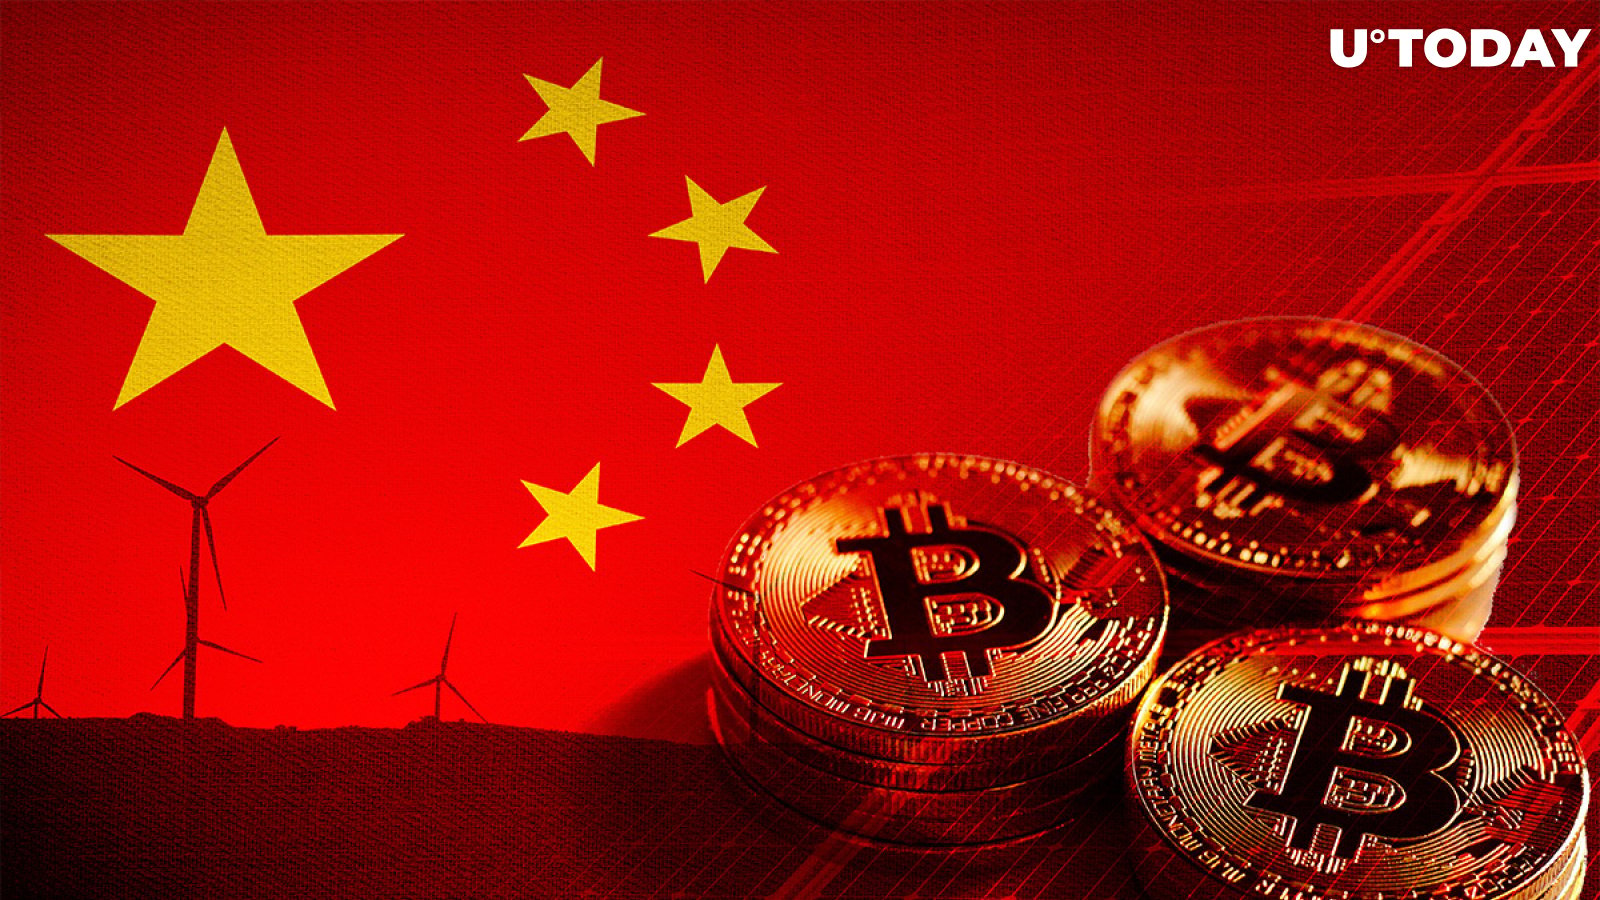 Bitcoin (BTC) Miners Might Be Leaving China. Is This Good or Bad?